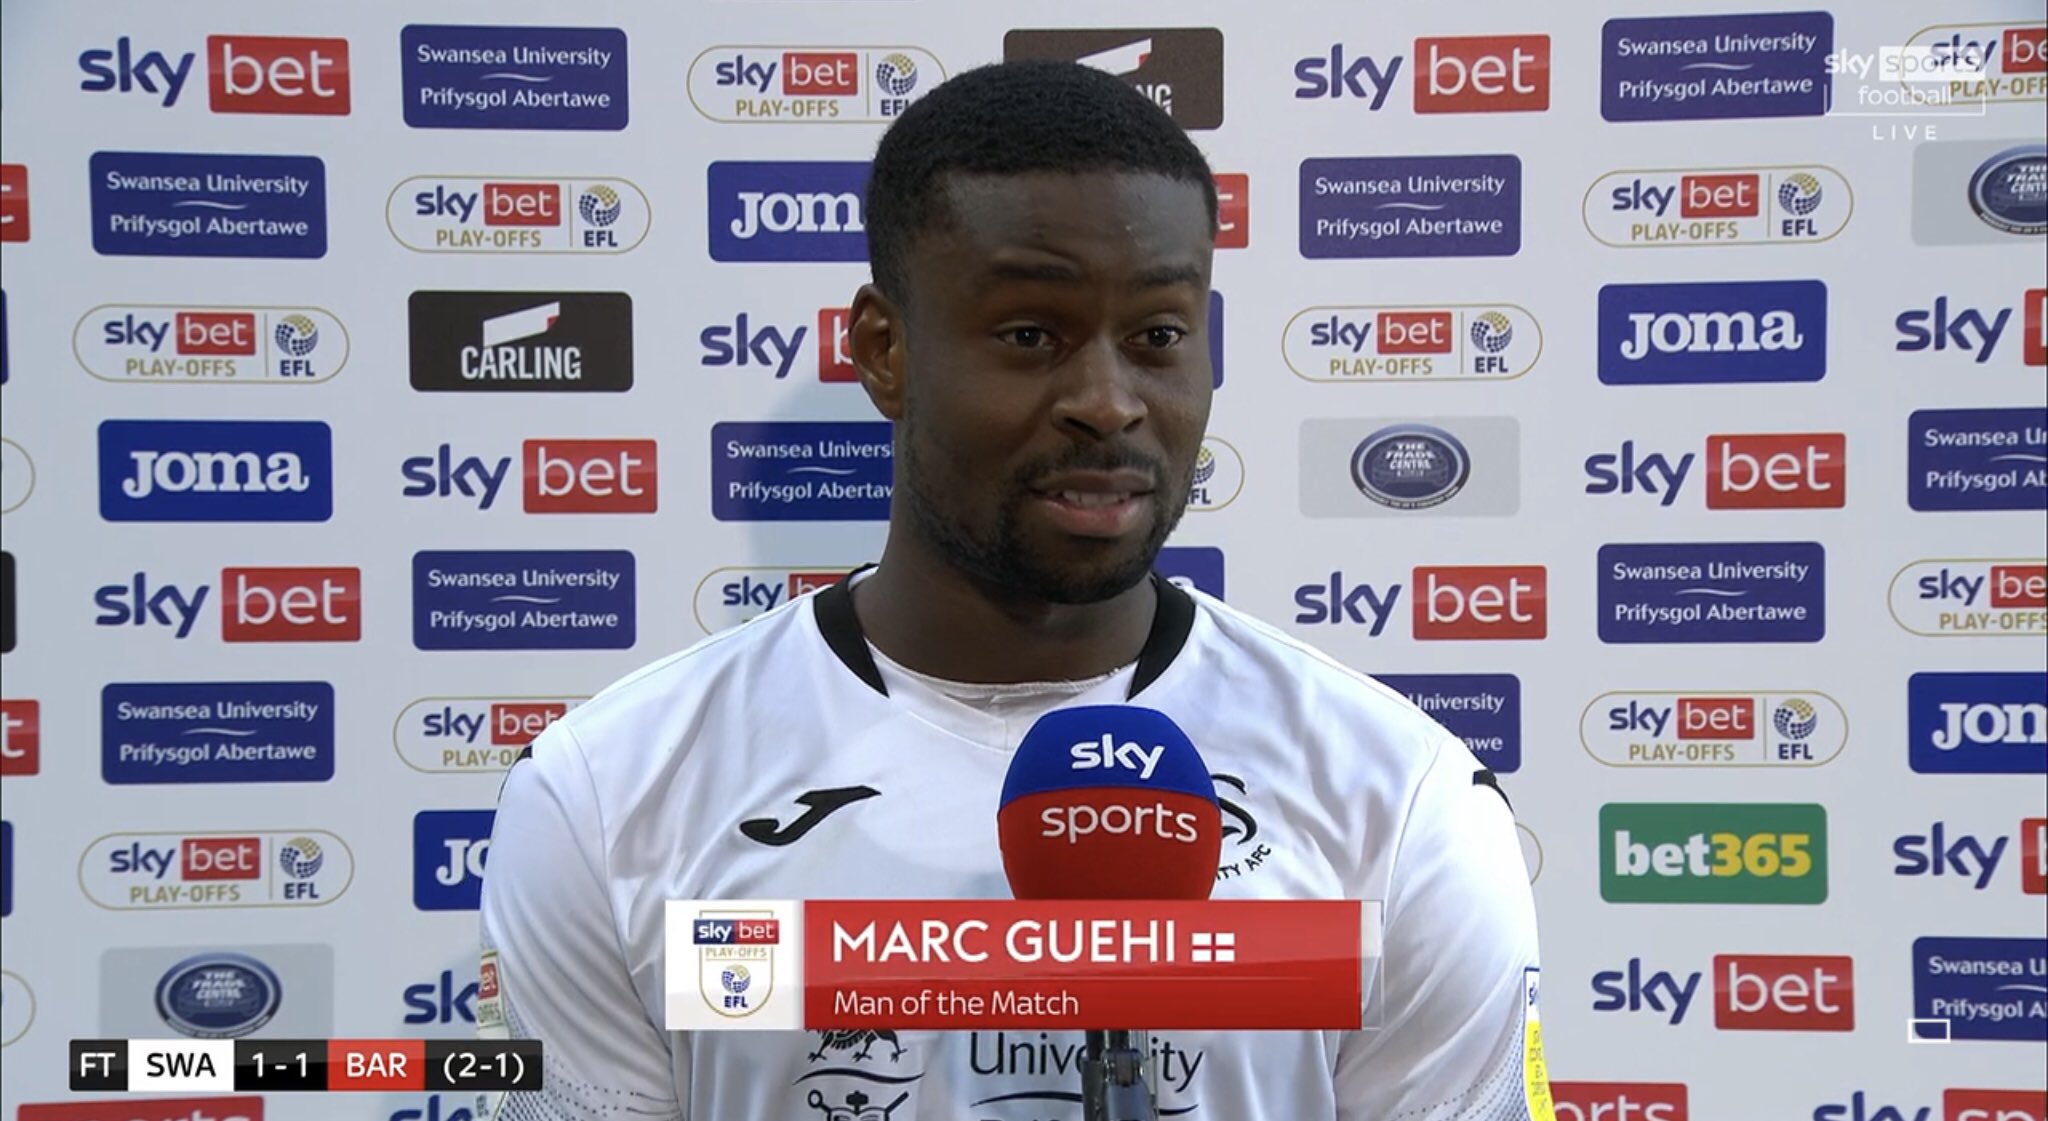 Sky Sports Statto on Twitter: "⭐️ Man of the Match, @SwansOfficial's Marc Guehi 37 touches Won 9/11 duels (won all 3 aerial duels) 7 clearances 3 tackles 3 fouls won Youngest player